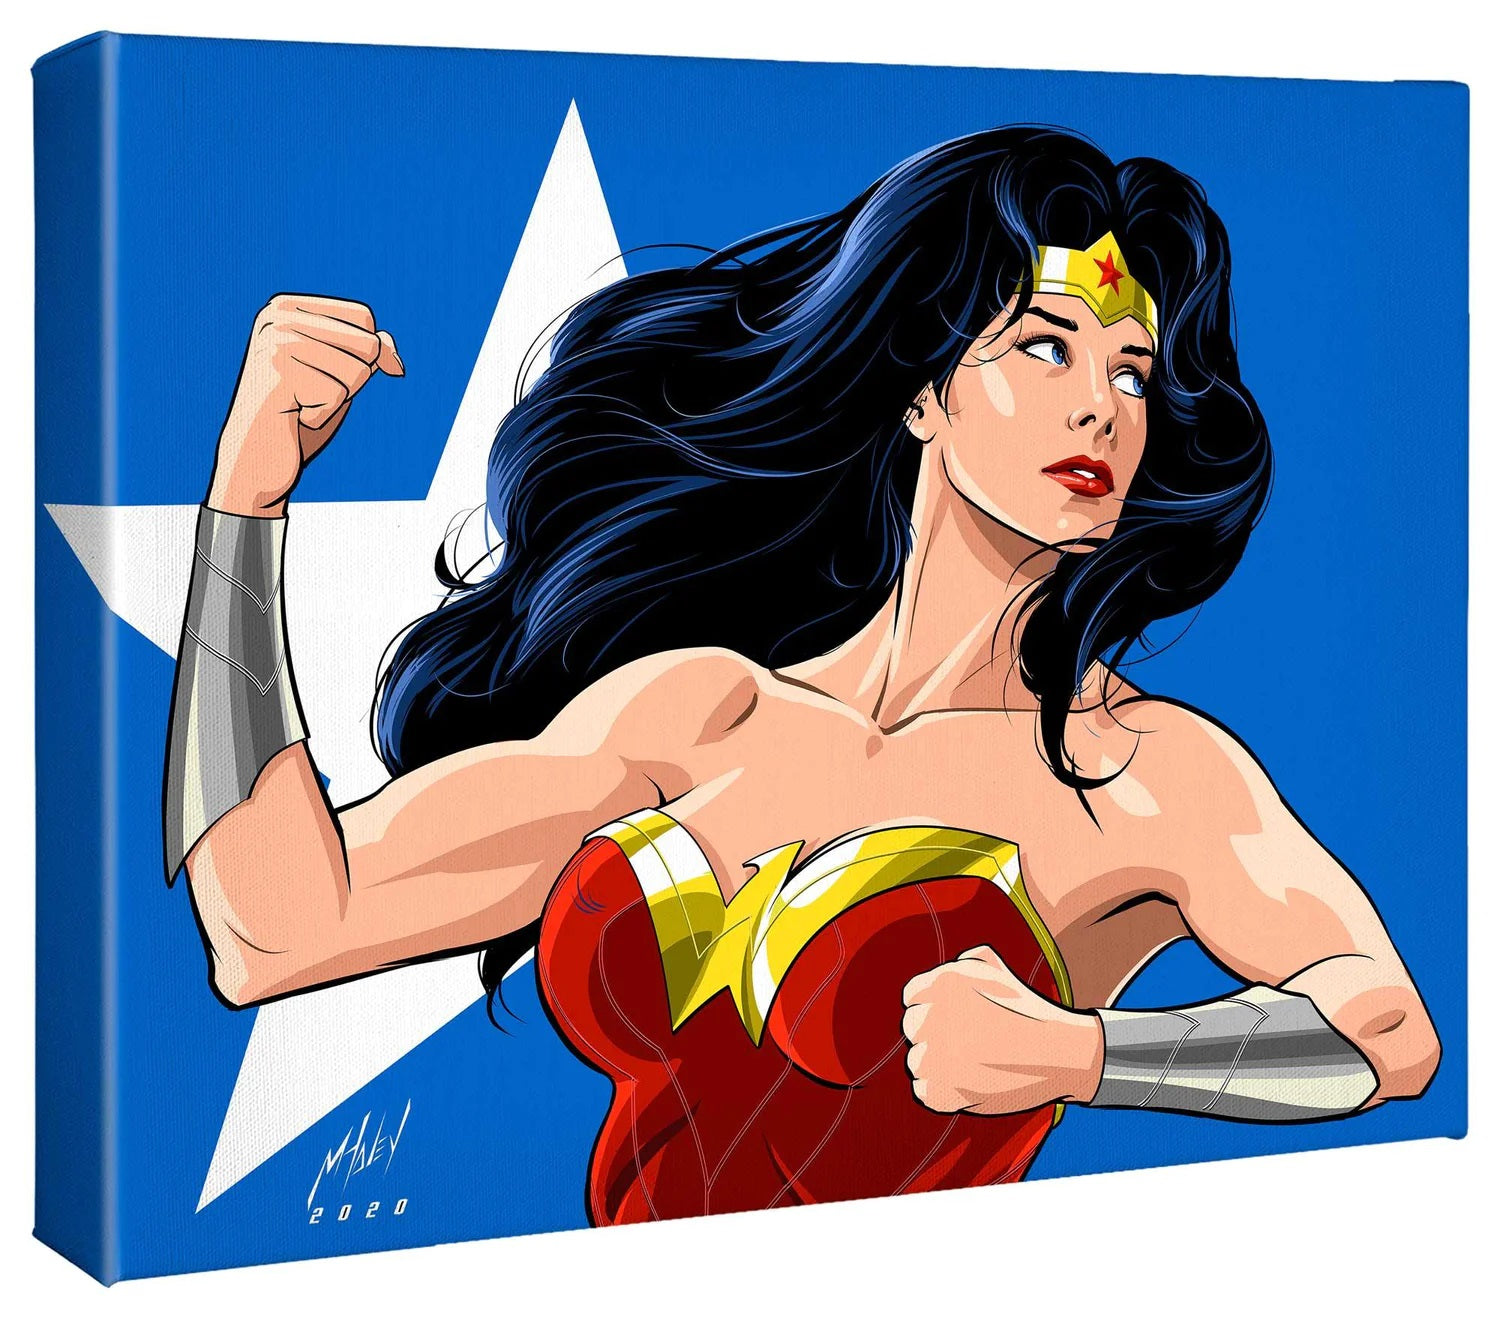  the iconic Wonder Woman comes to life in a vibrant burst of color and power.